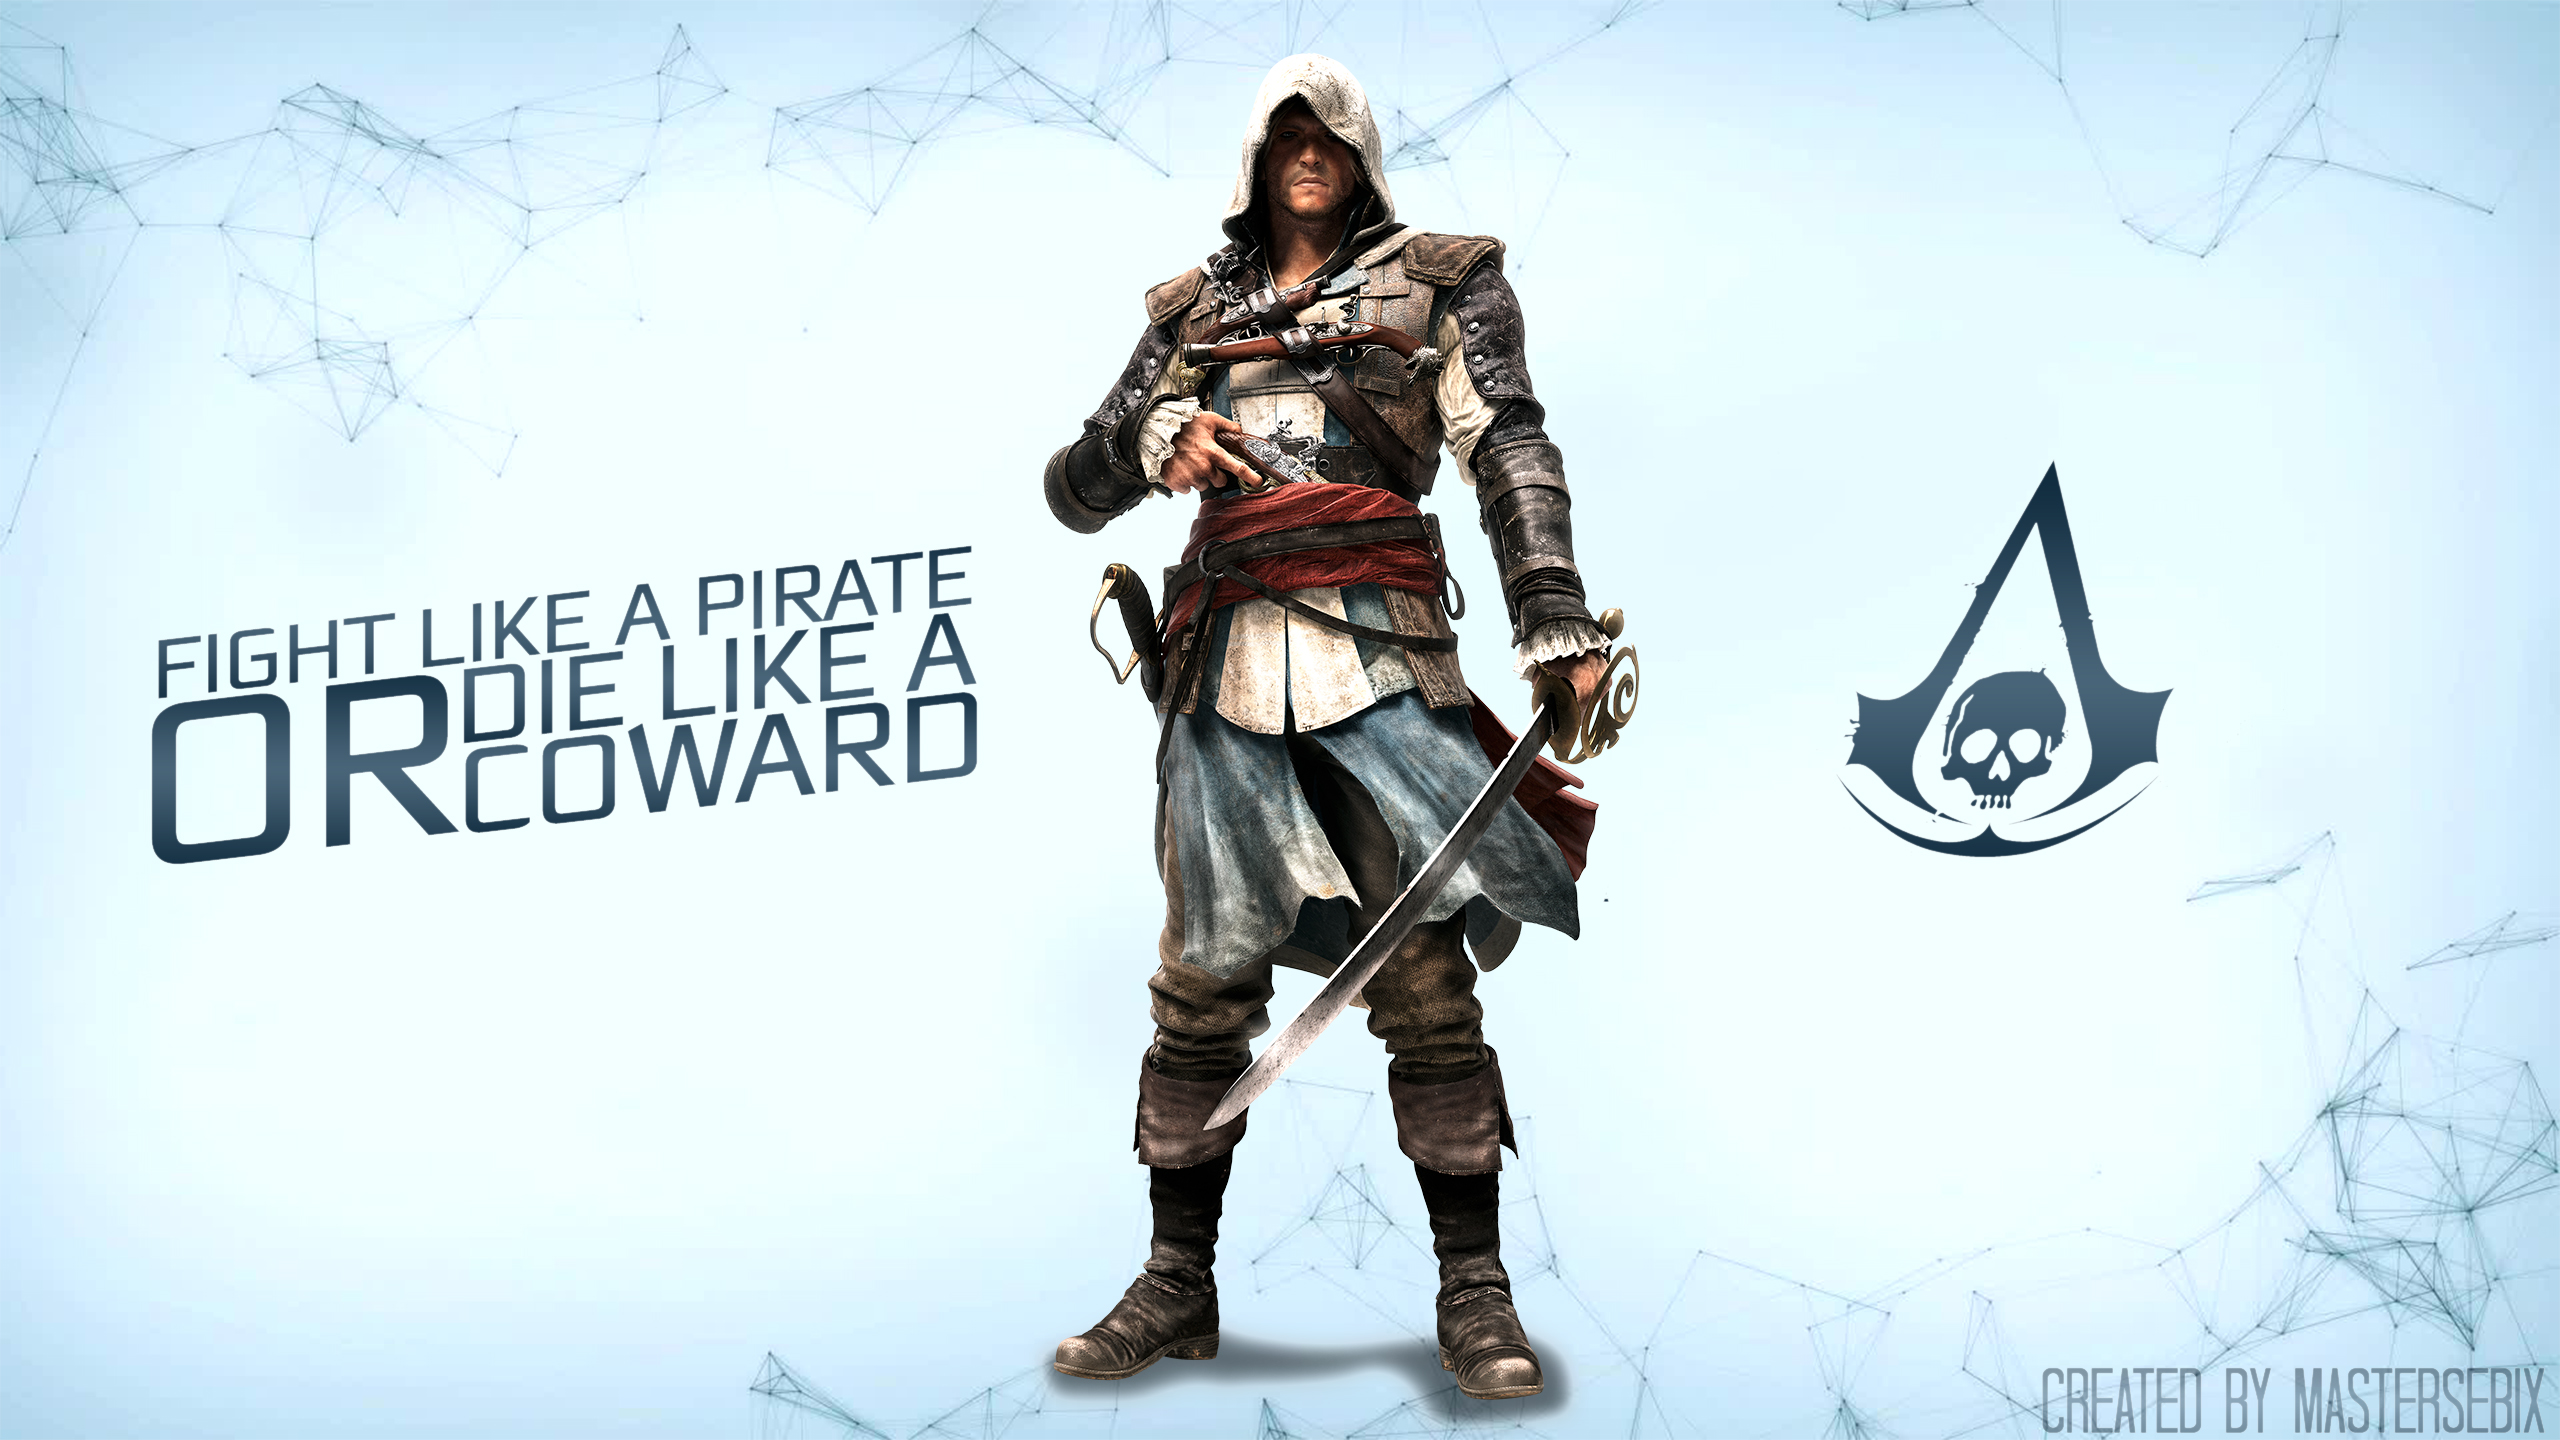 The Character Assassins Creed 4 Black Flag 2013 Game - Assassins Creed 3  Character - 2560x1440 Wallpaper 